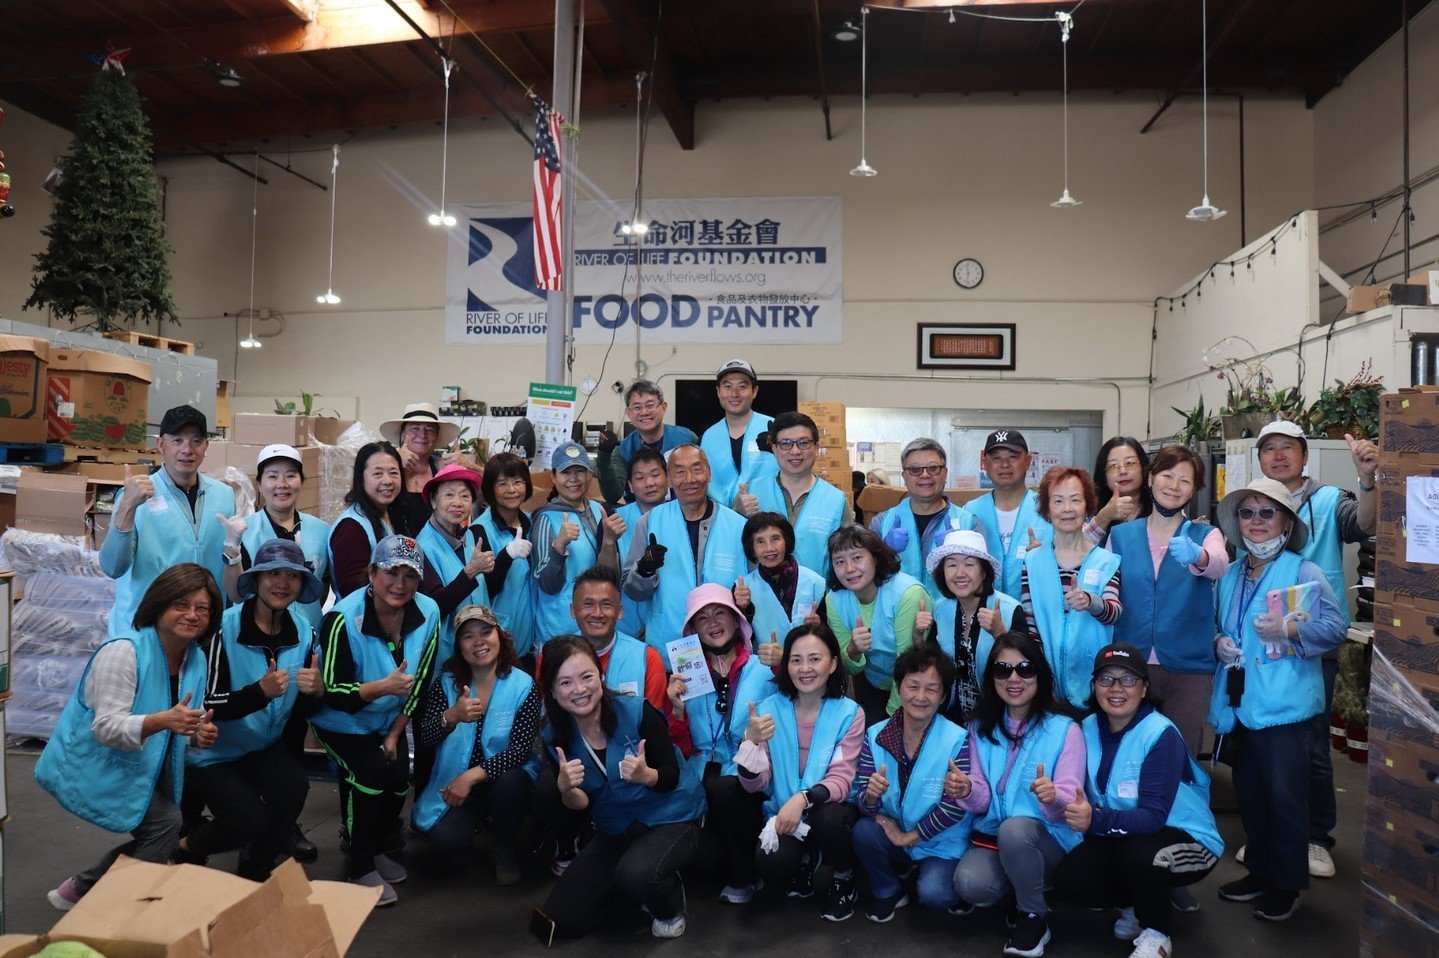 🌟✨ Join Us in Making a Difference! 🌟✨We need you!

🍲🥦 At Our Community Food Pantry, Every Meal Counts! 🥕🥪

👉 Did you know that right here in our neighborhood, there are families who struggle to put food on the table every day? It's a reality w